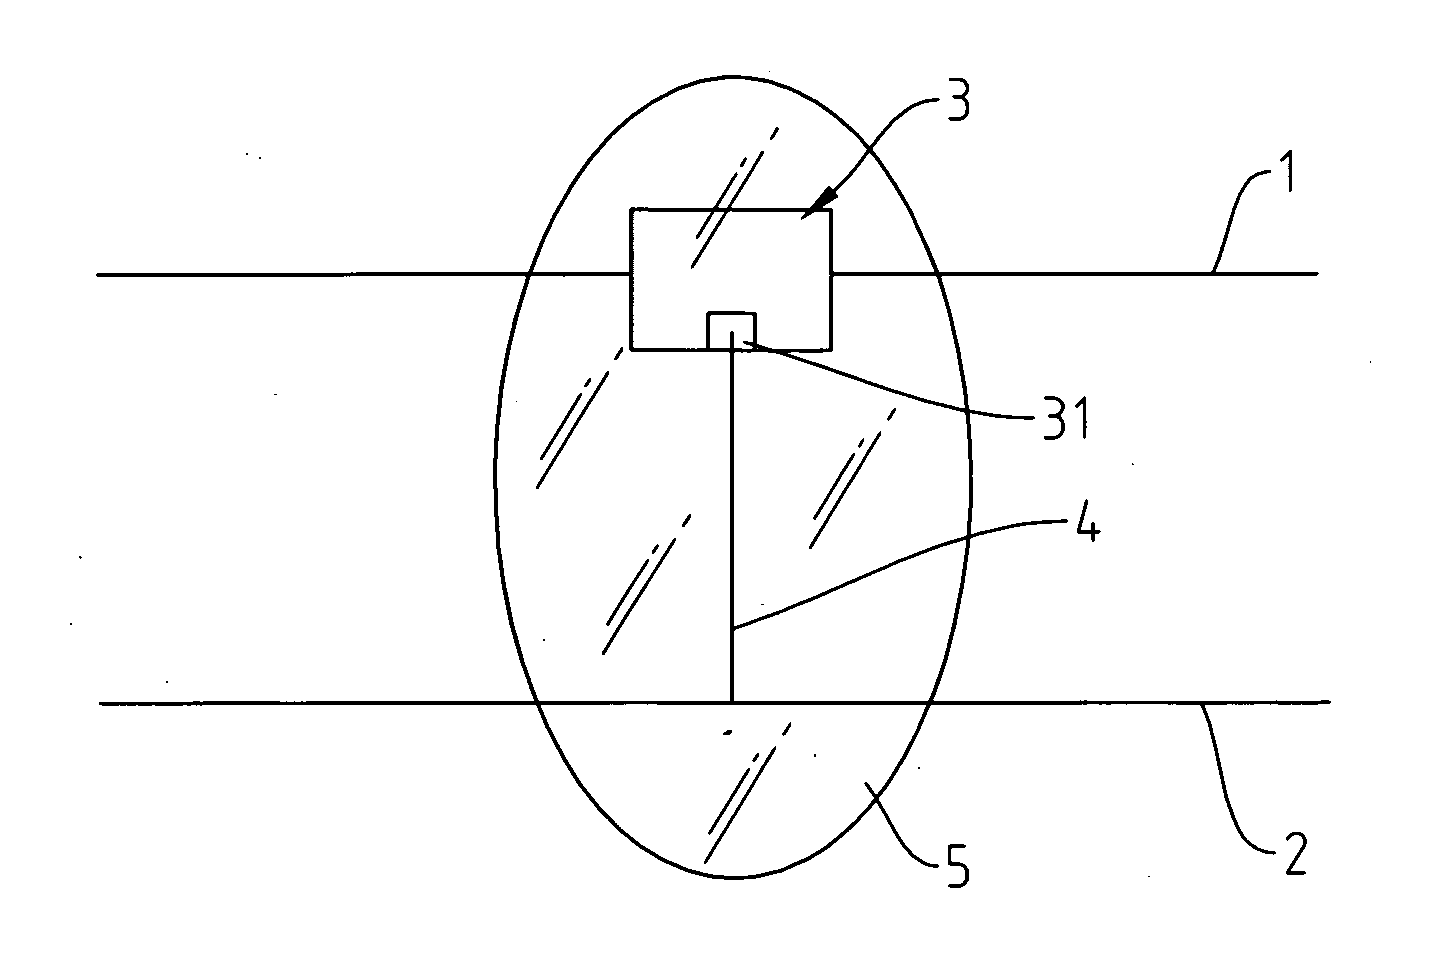 Flexible conducting wire structure having light emitters